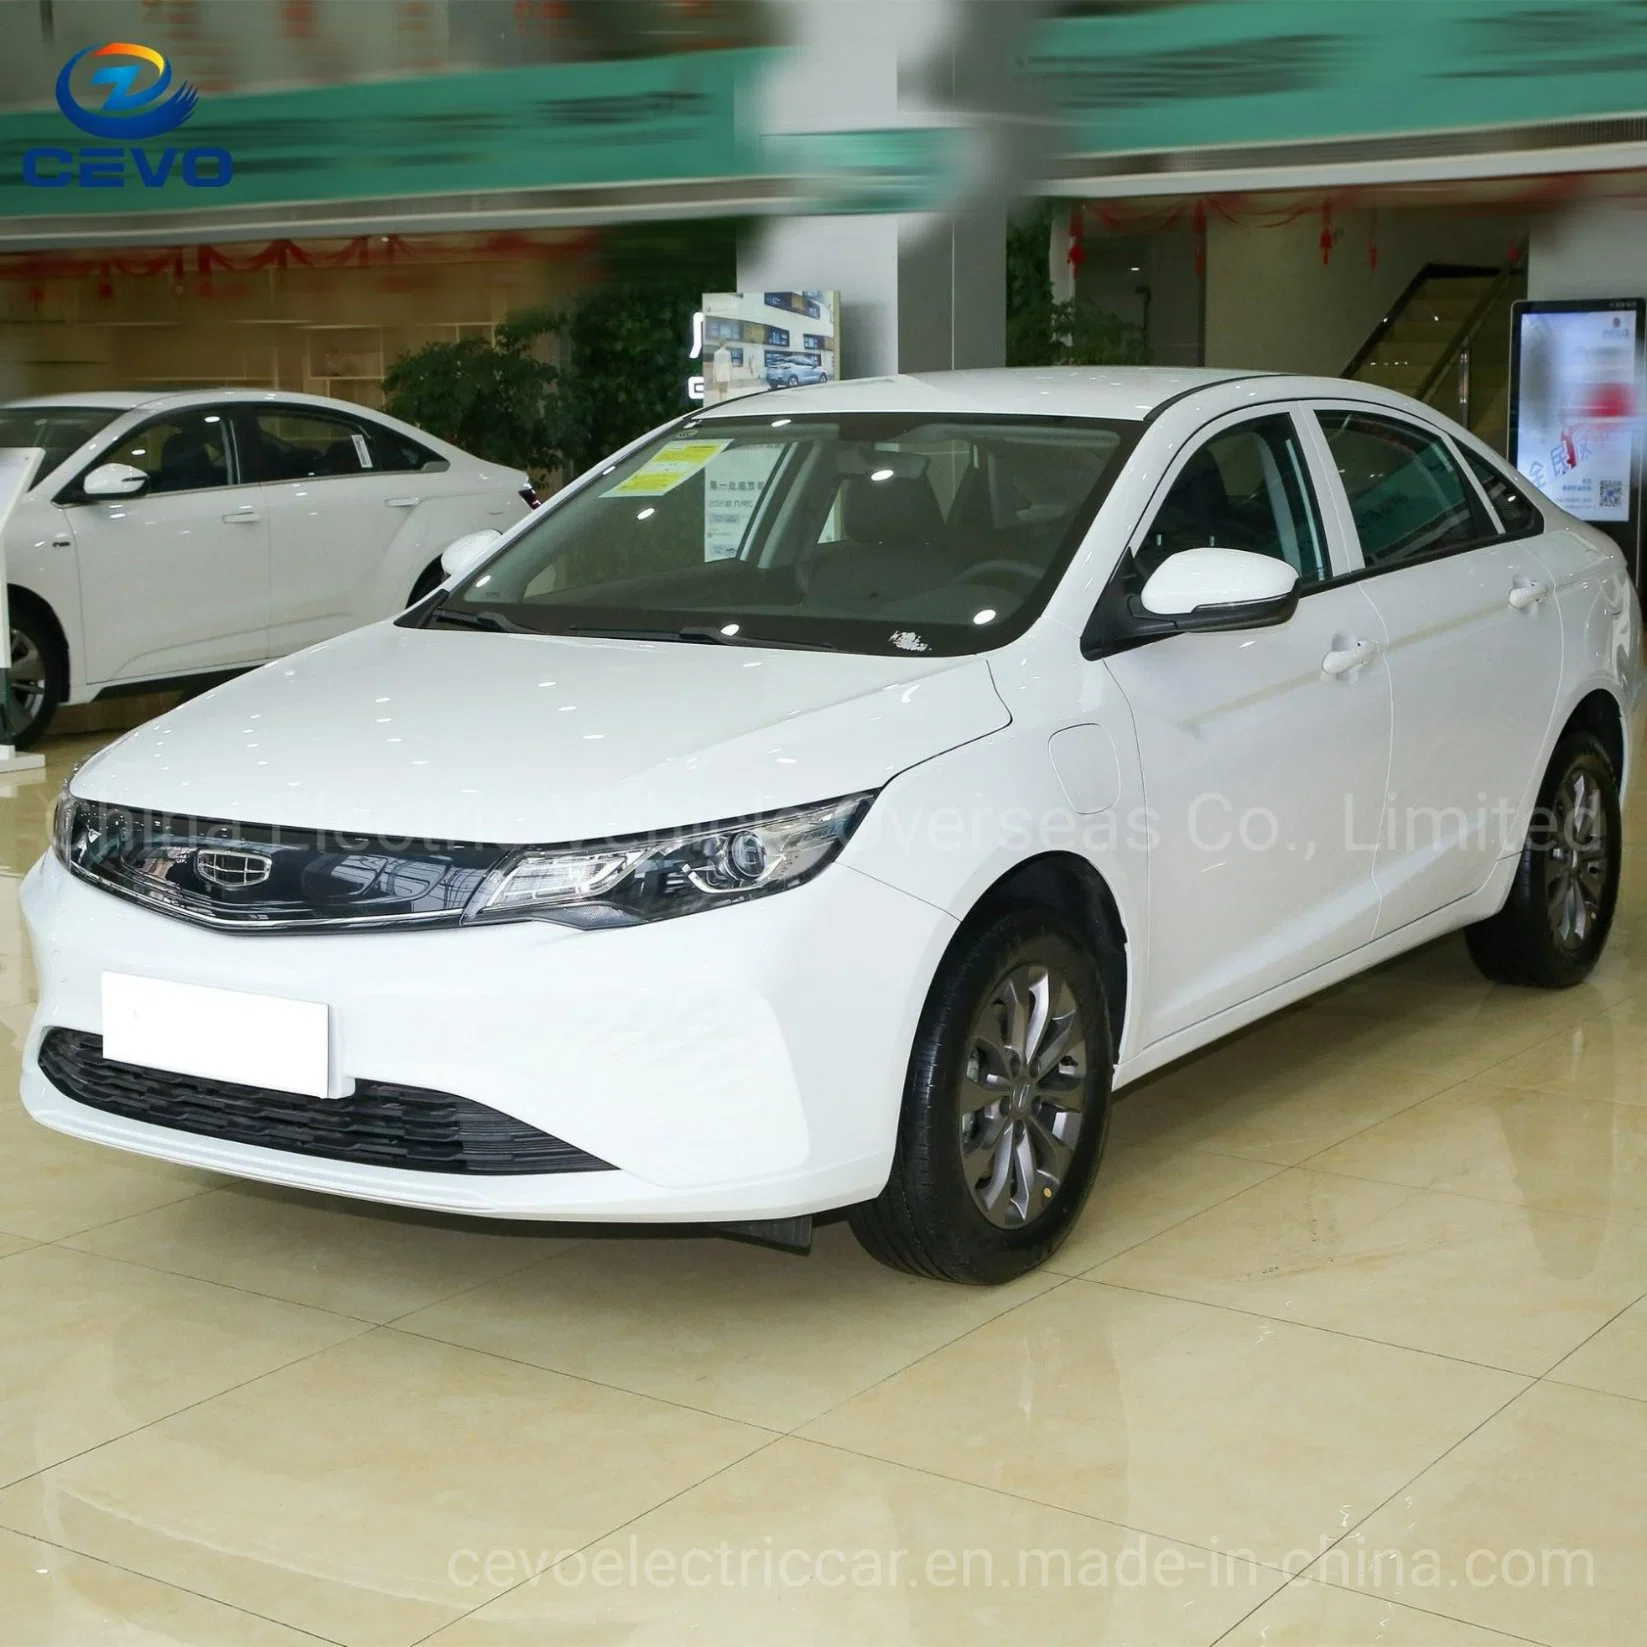 First High Speed Electric Sightseeing Cars High Battery Life Electric Vehicle Best Affordable Low Cost Cheapest Sedan EV Geely Emgrand Electric Car for Sale